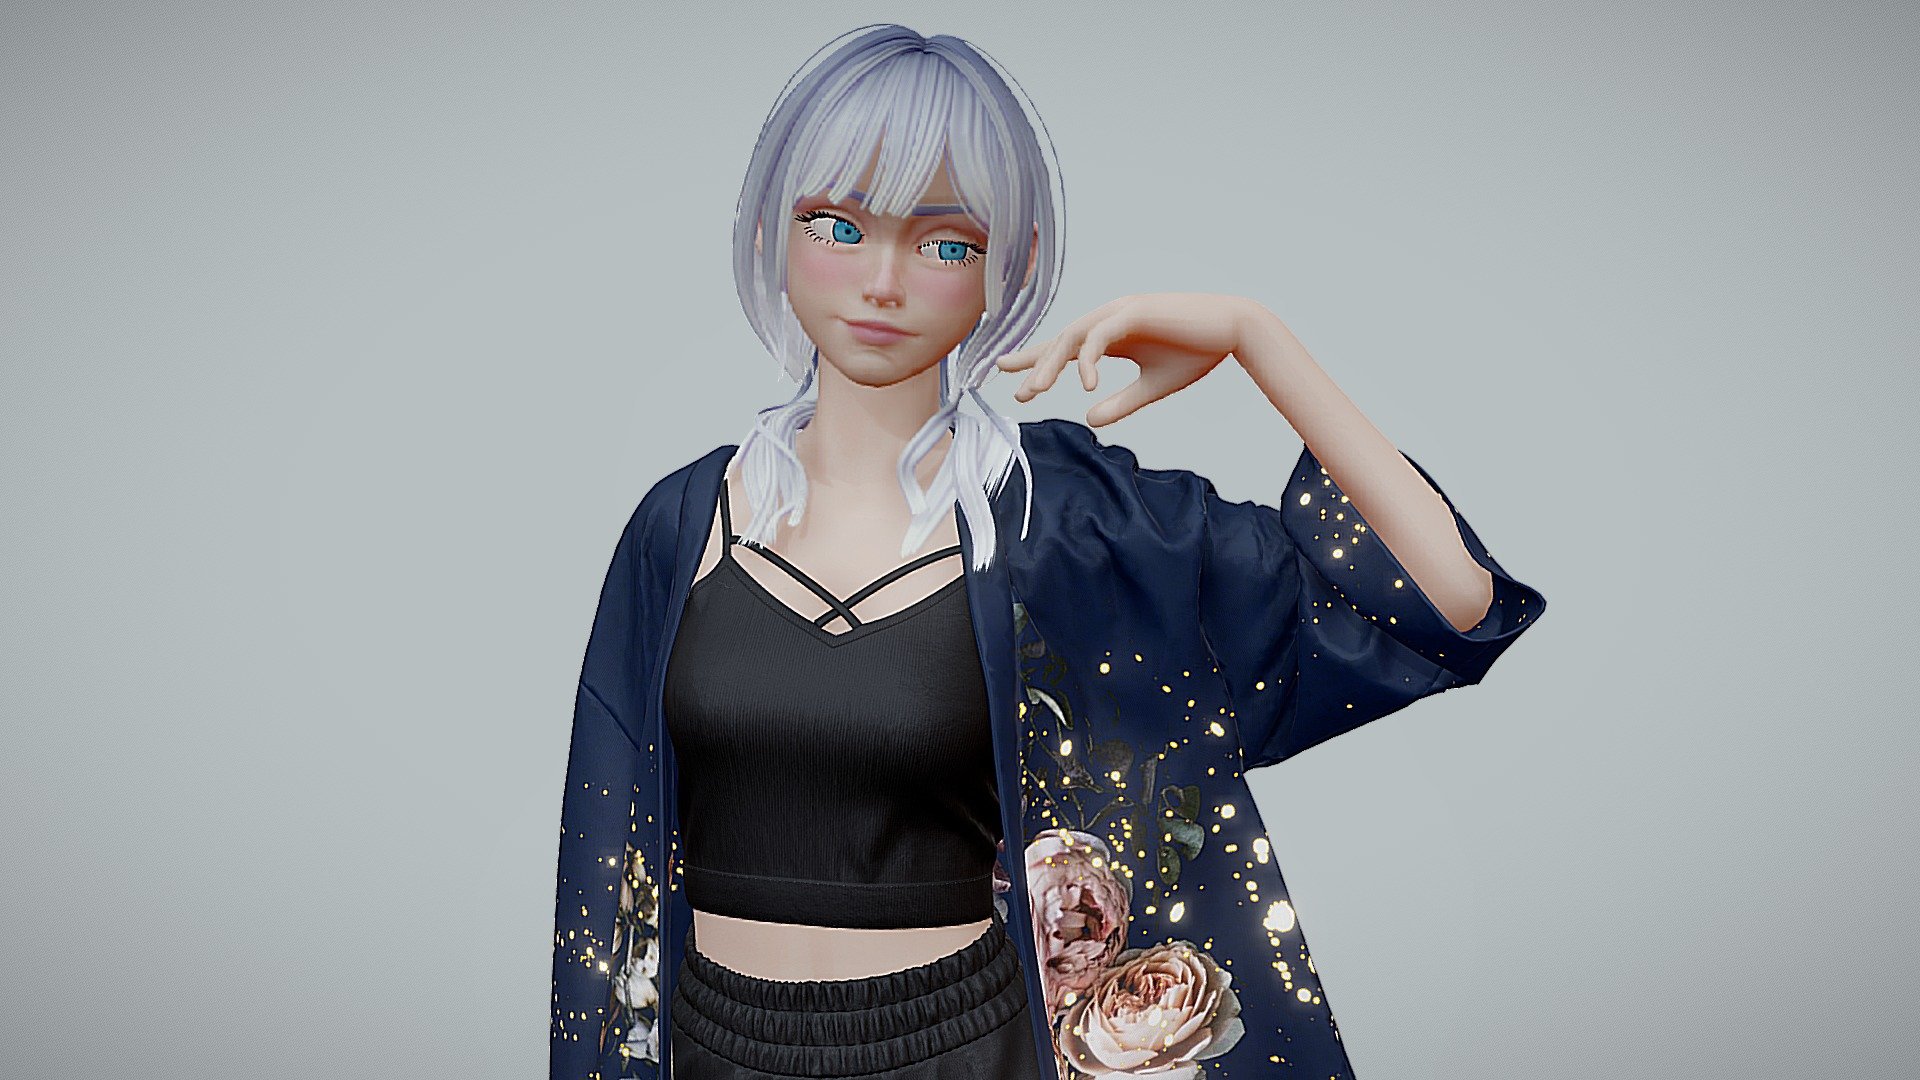 A girl sculpted in Blender with a kimono inspired garment created using Marvelous Designer.
 - The girl in kimono jacket - 3D model by Akiko.Tomiyoshi 3d model